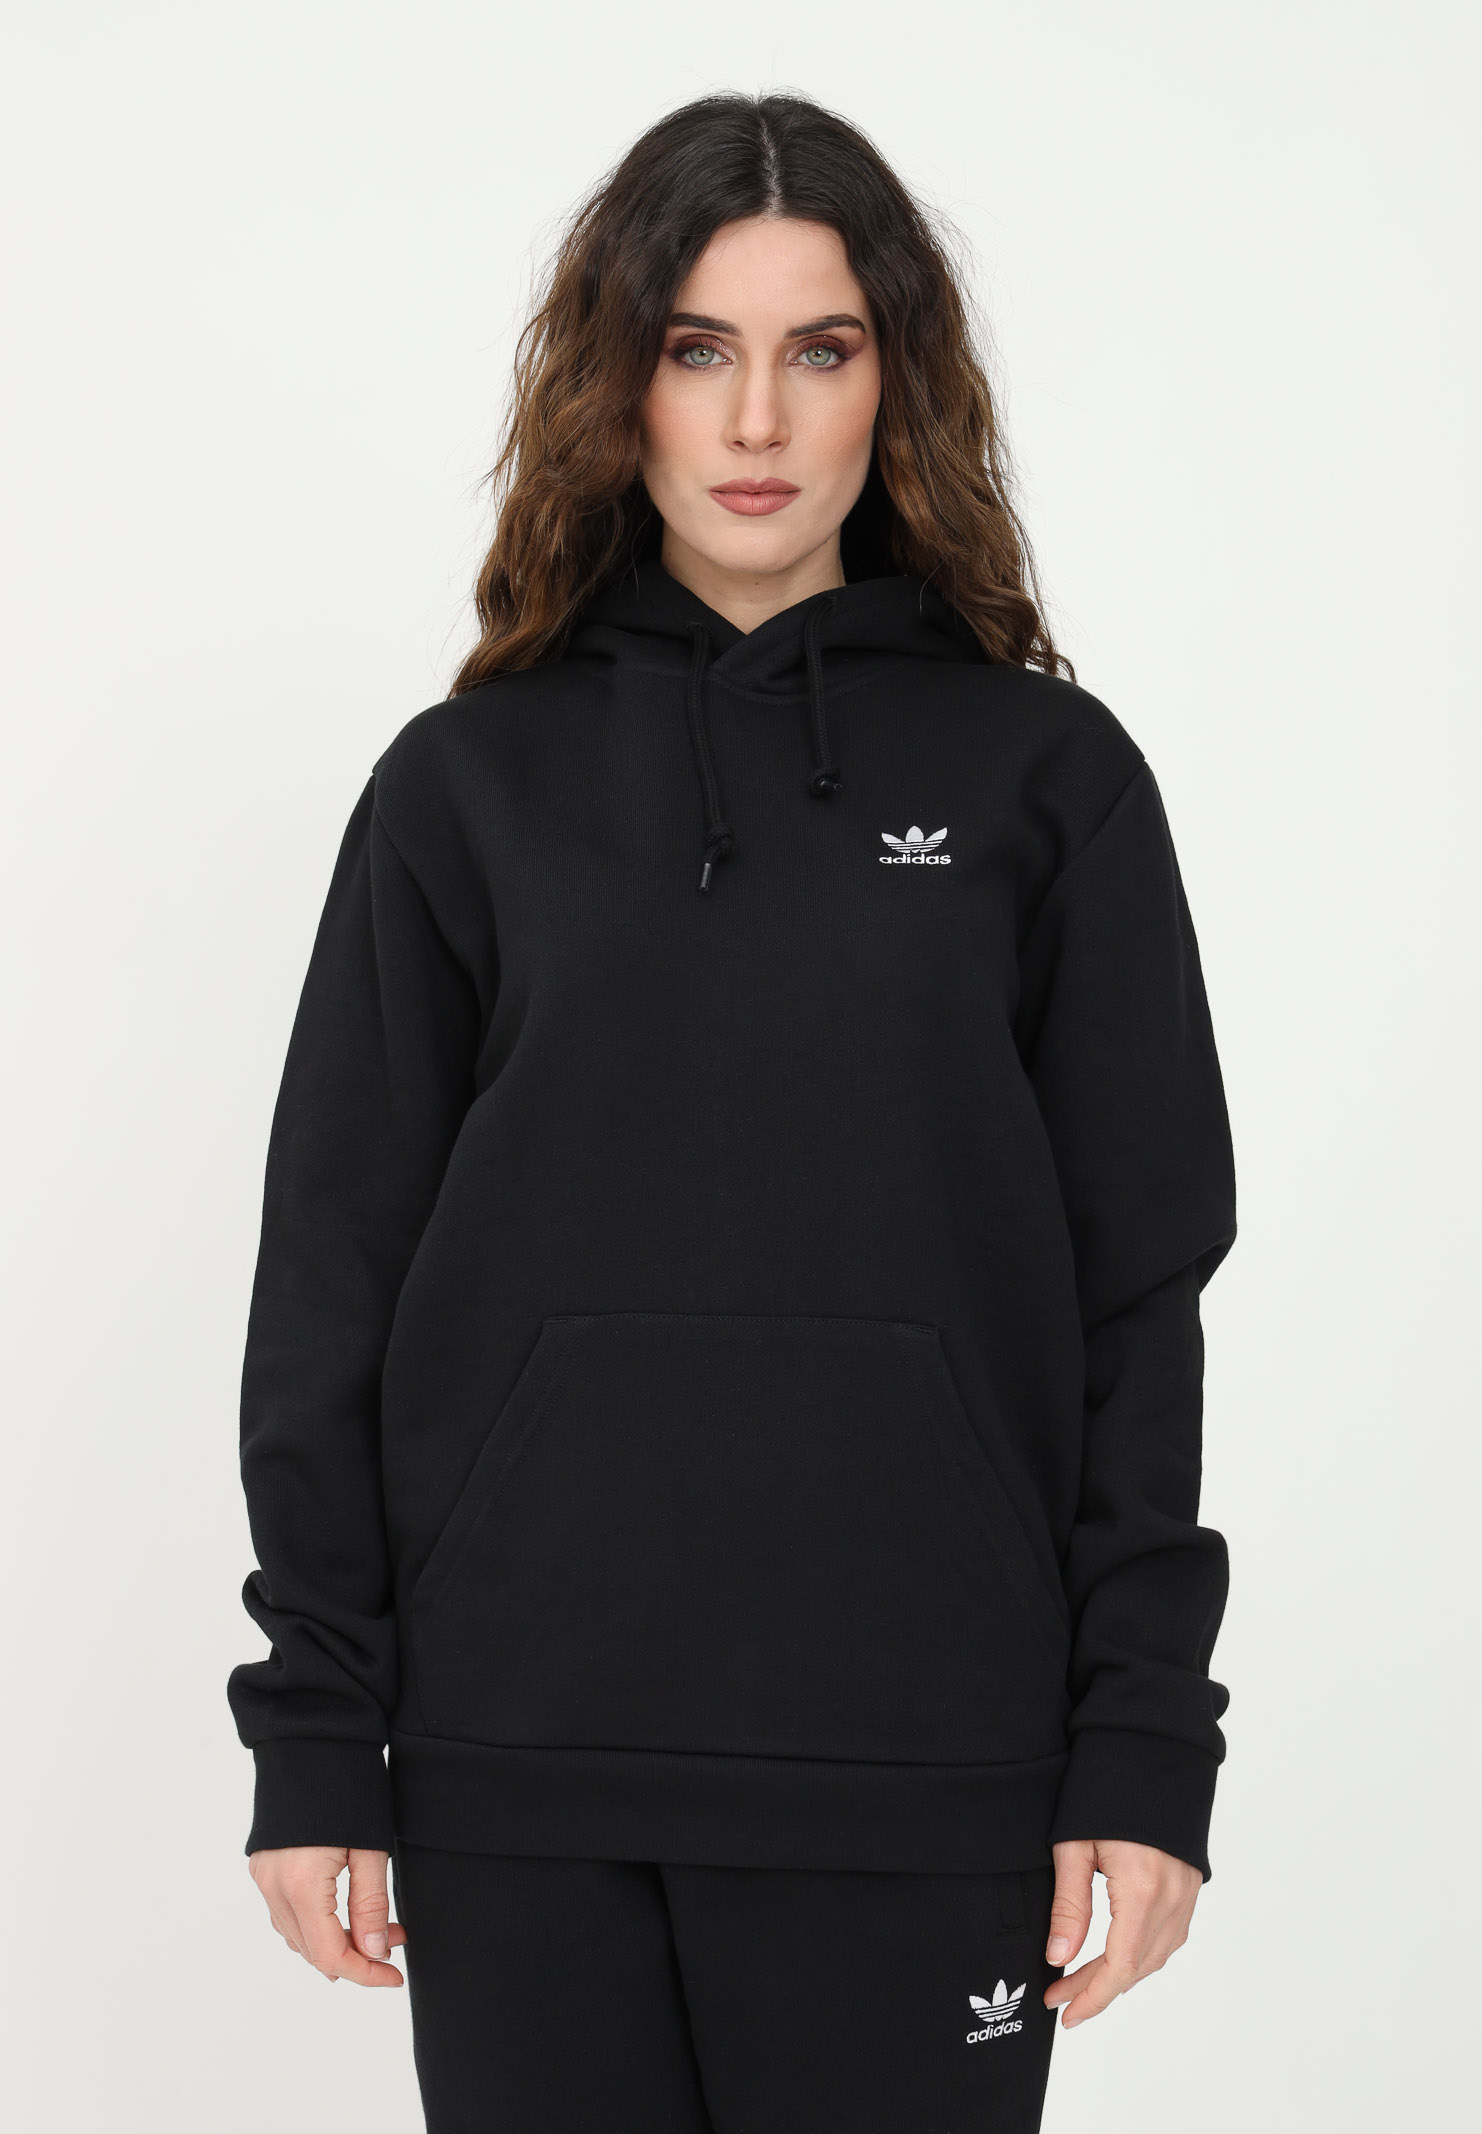 Black hoodie for men and women with trefoil logo embroidery ADIDAS | FM9956.